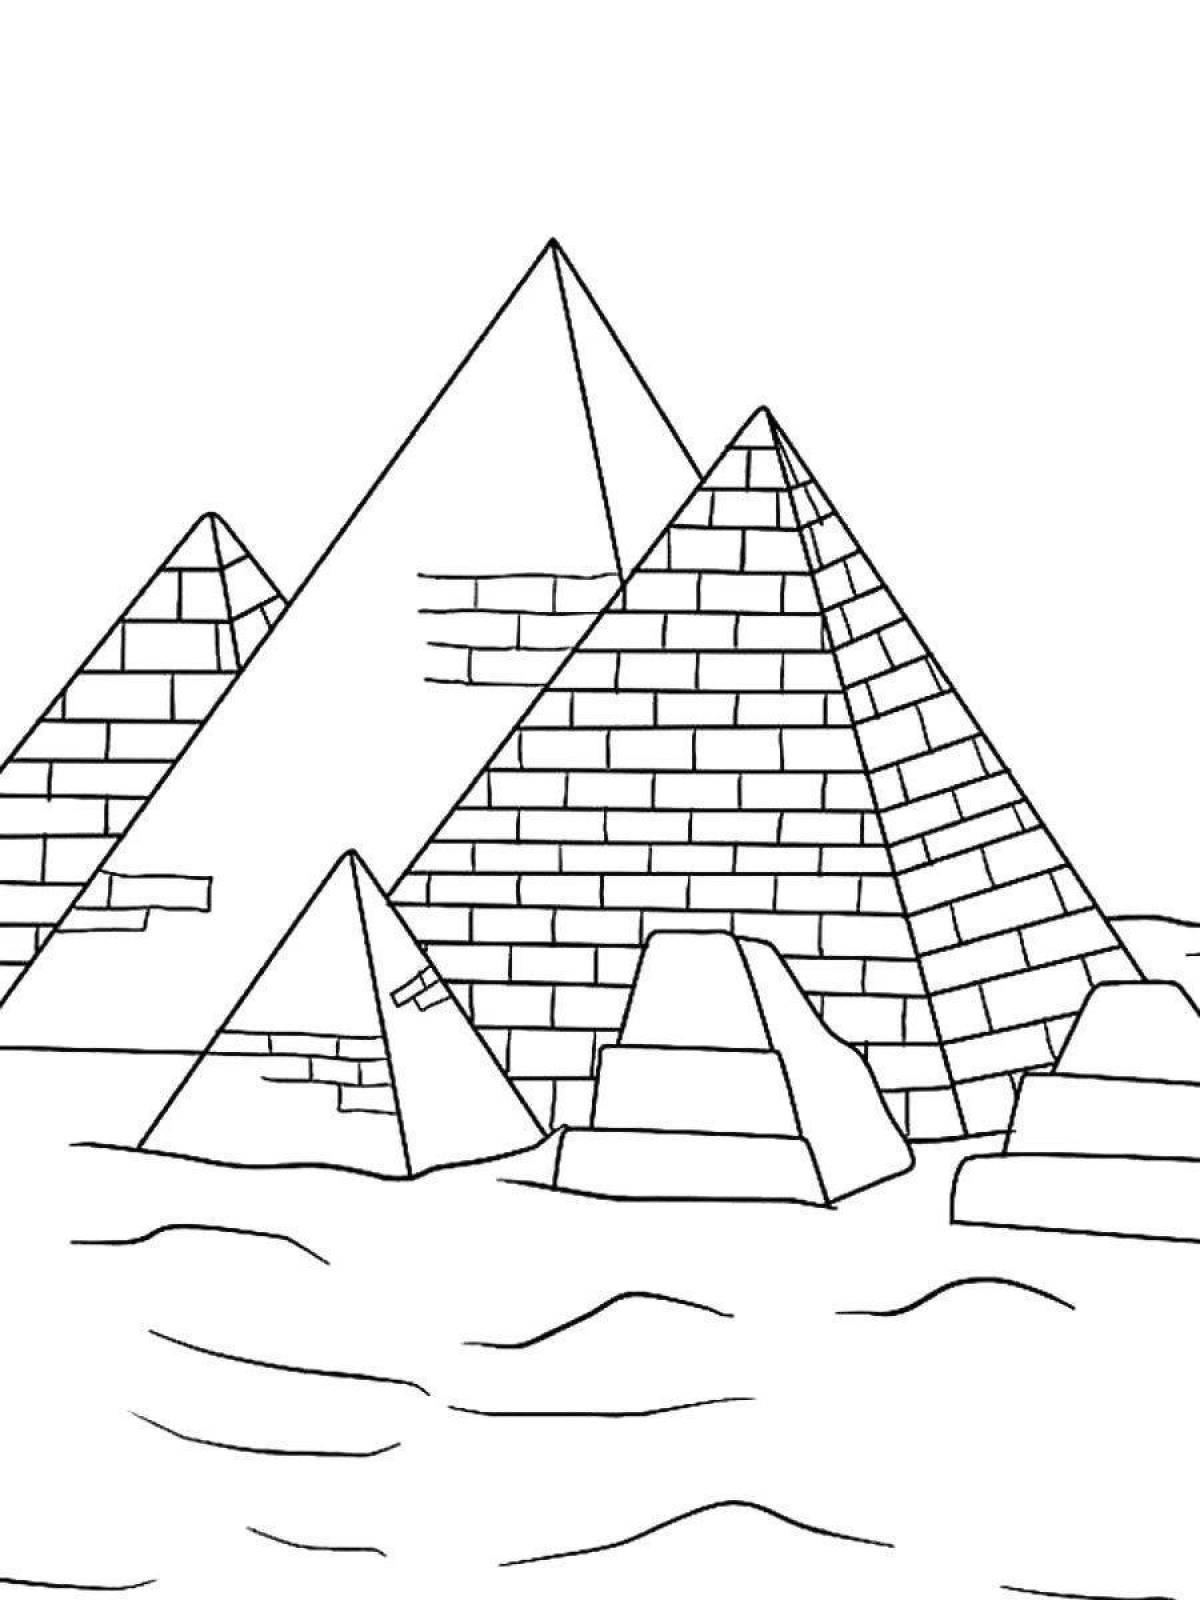 Glorious pyramid coloring page